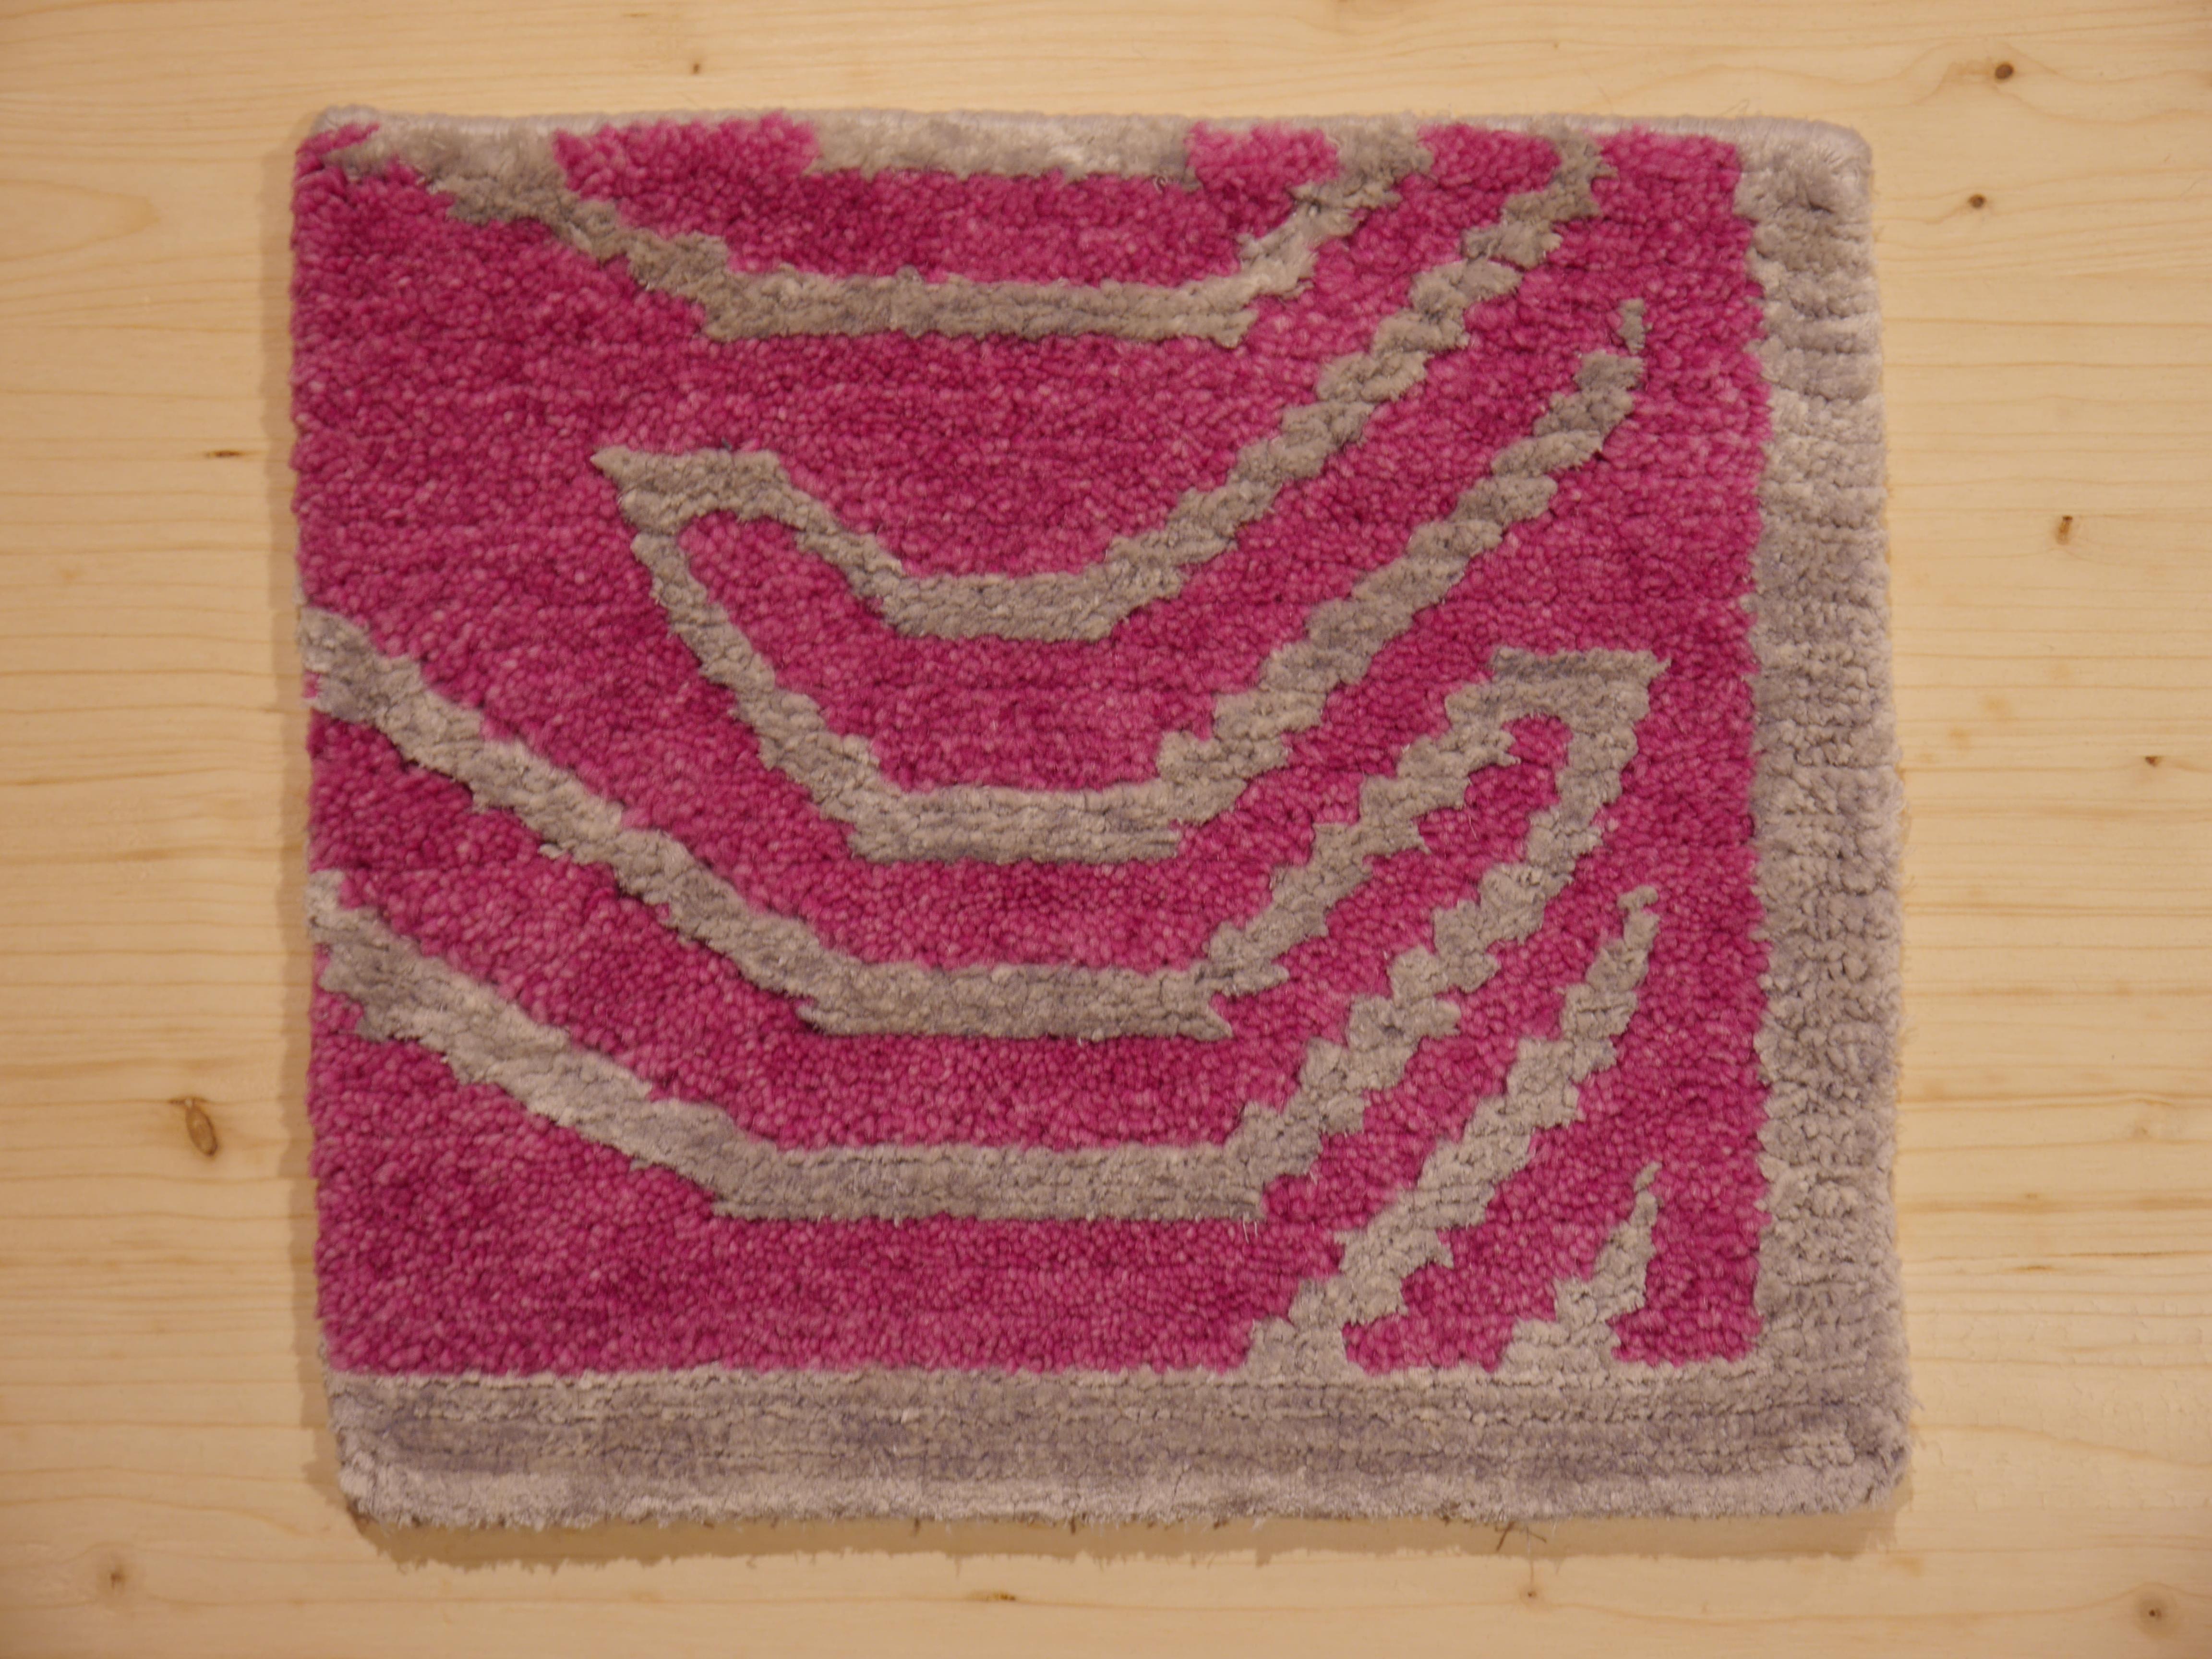 Sample Rug for a pink and silver Tibetan Tiger rug, hand knotted in Nepal.

If you would like to order the Pink Tiger rug and you are unsure about the color in your lighting situation at home, please purchase this sample to confirm the colors. 
We